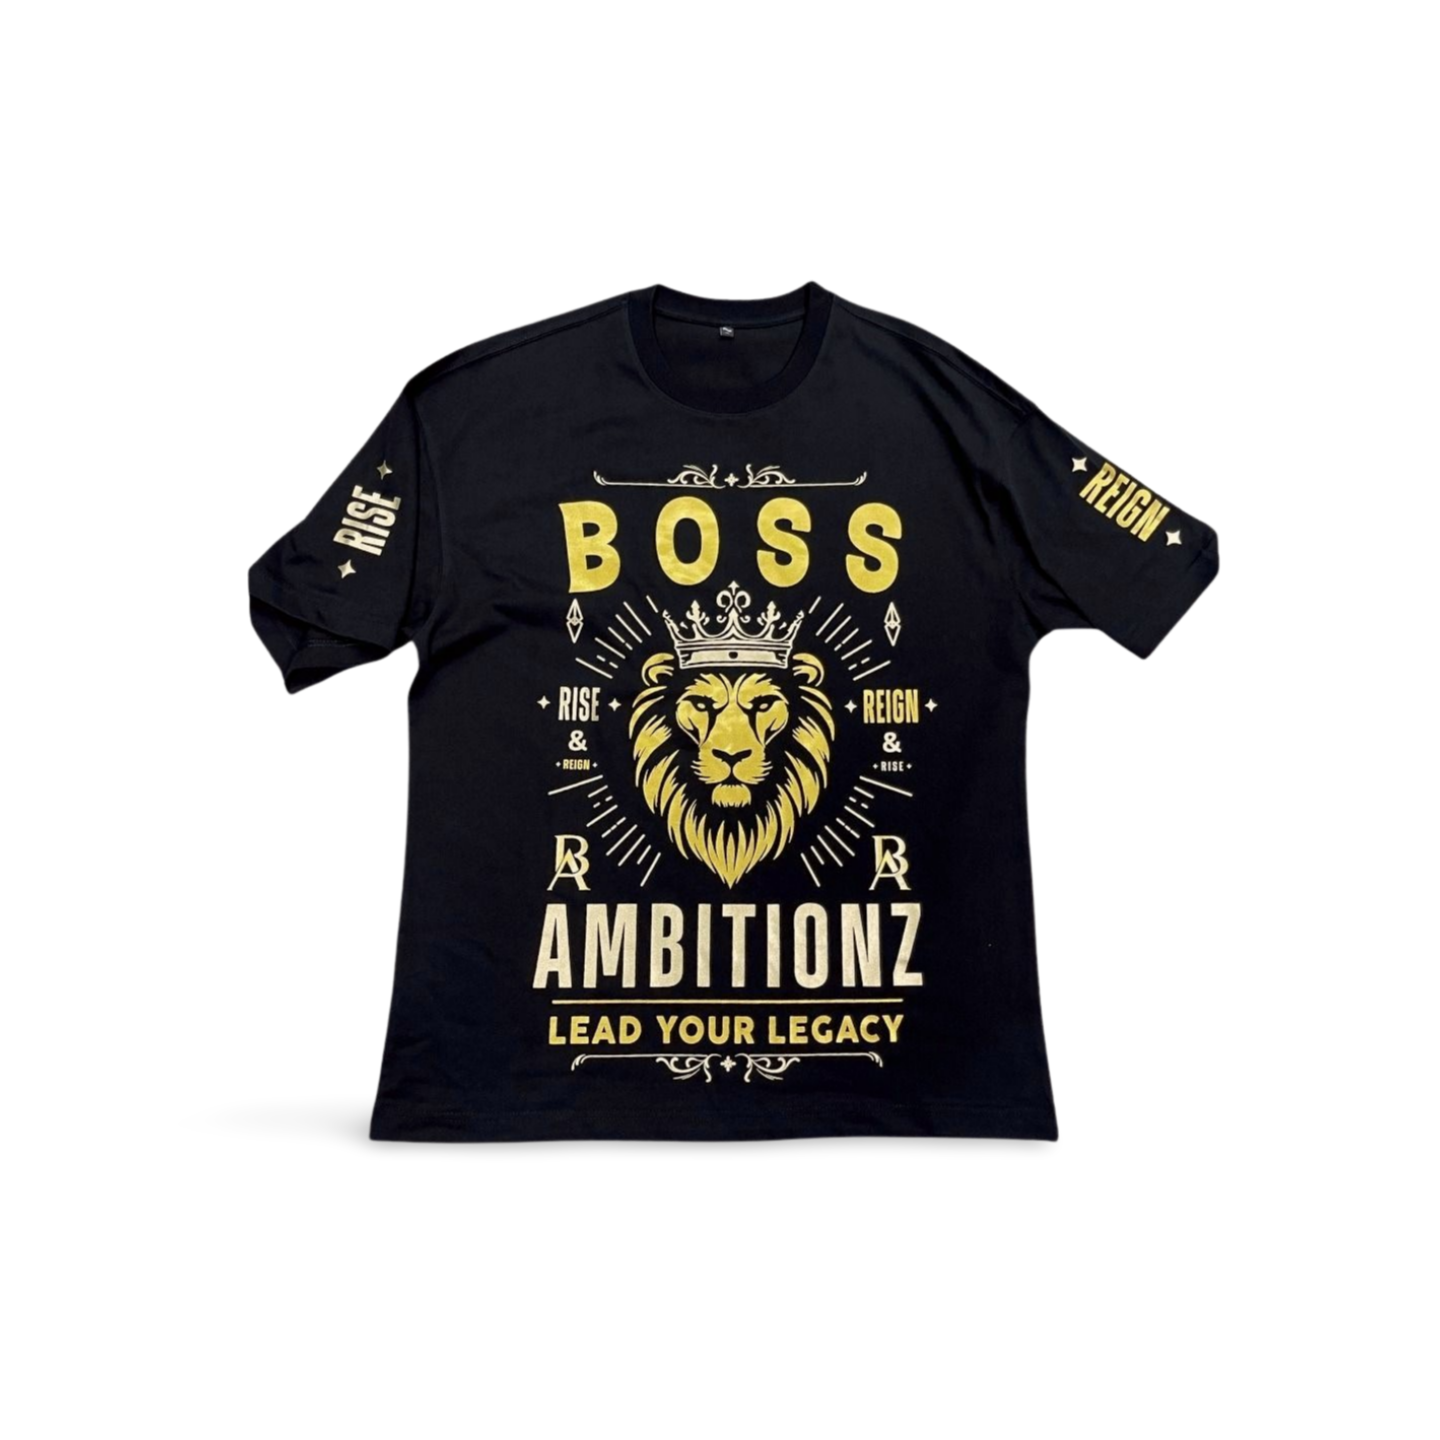 Front view of Boss Ambitionz men's black T-shirt with a majestic golden lion emblem and 'BOSS AMBITIONZ' text, symbolizing leadership and strength.